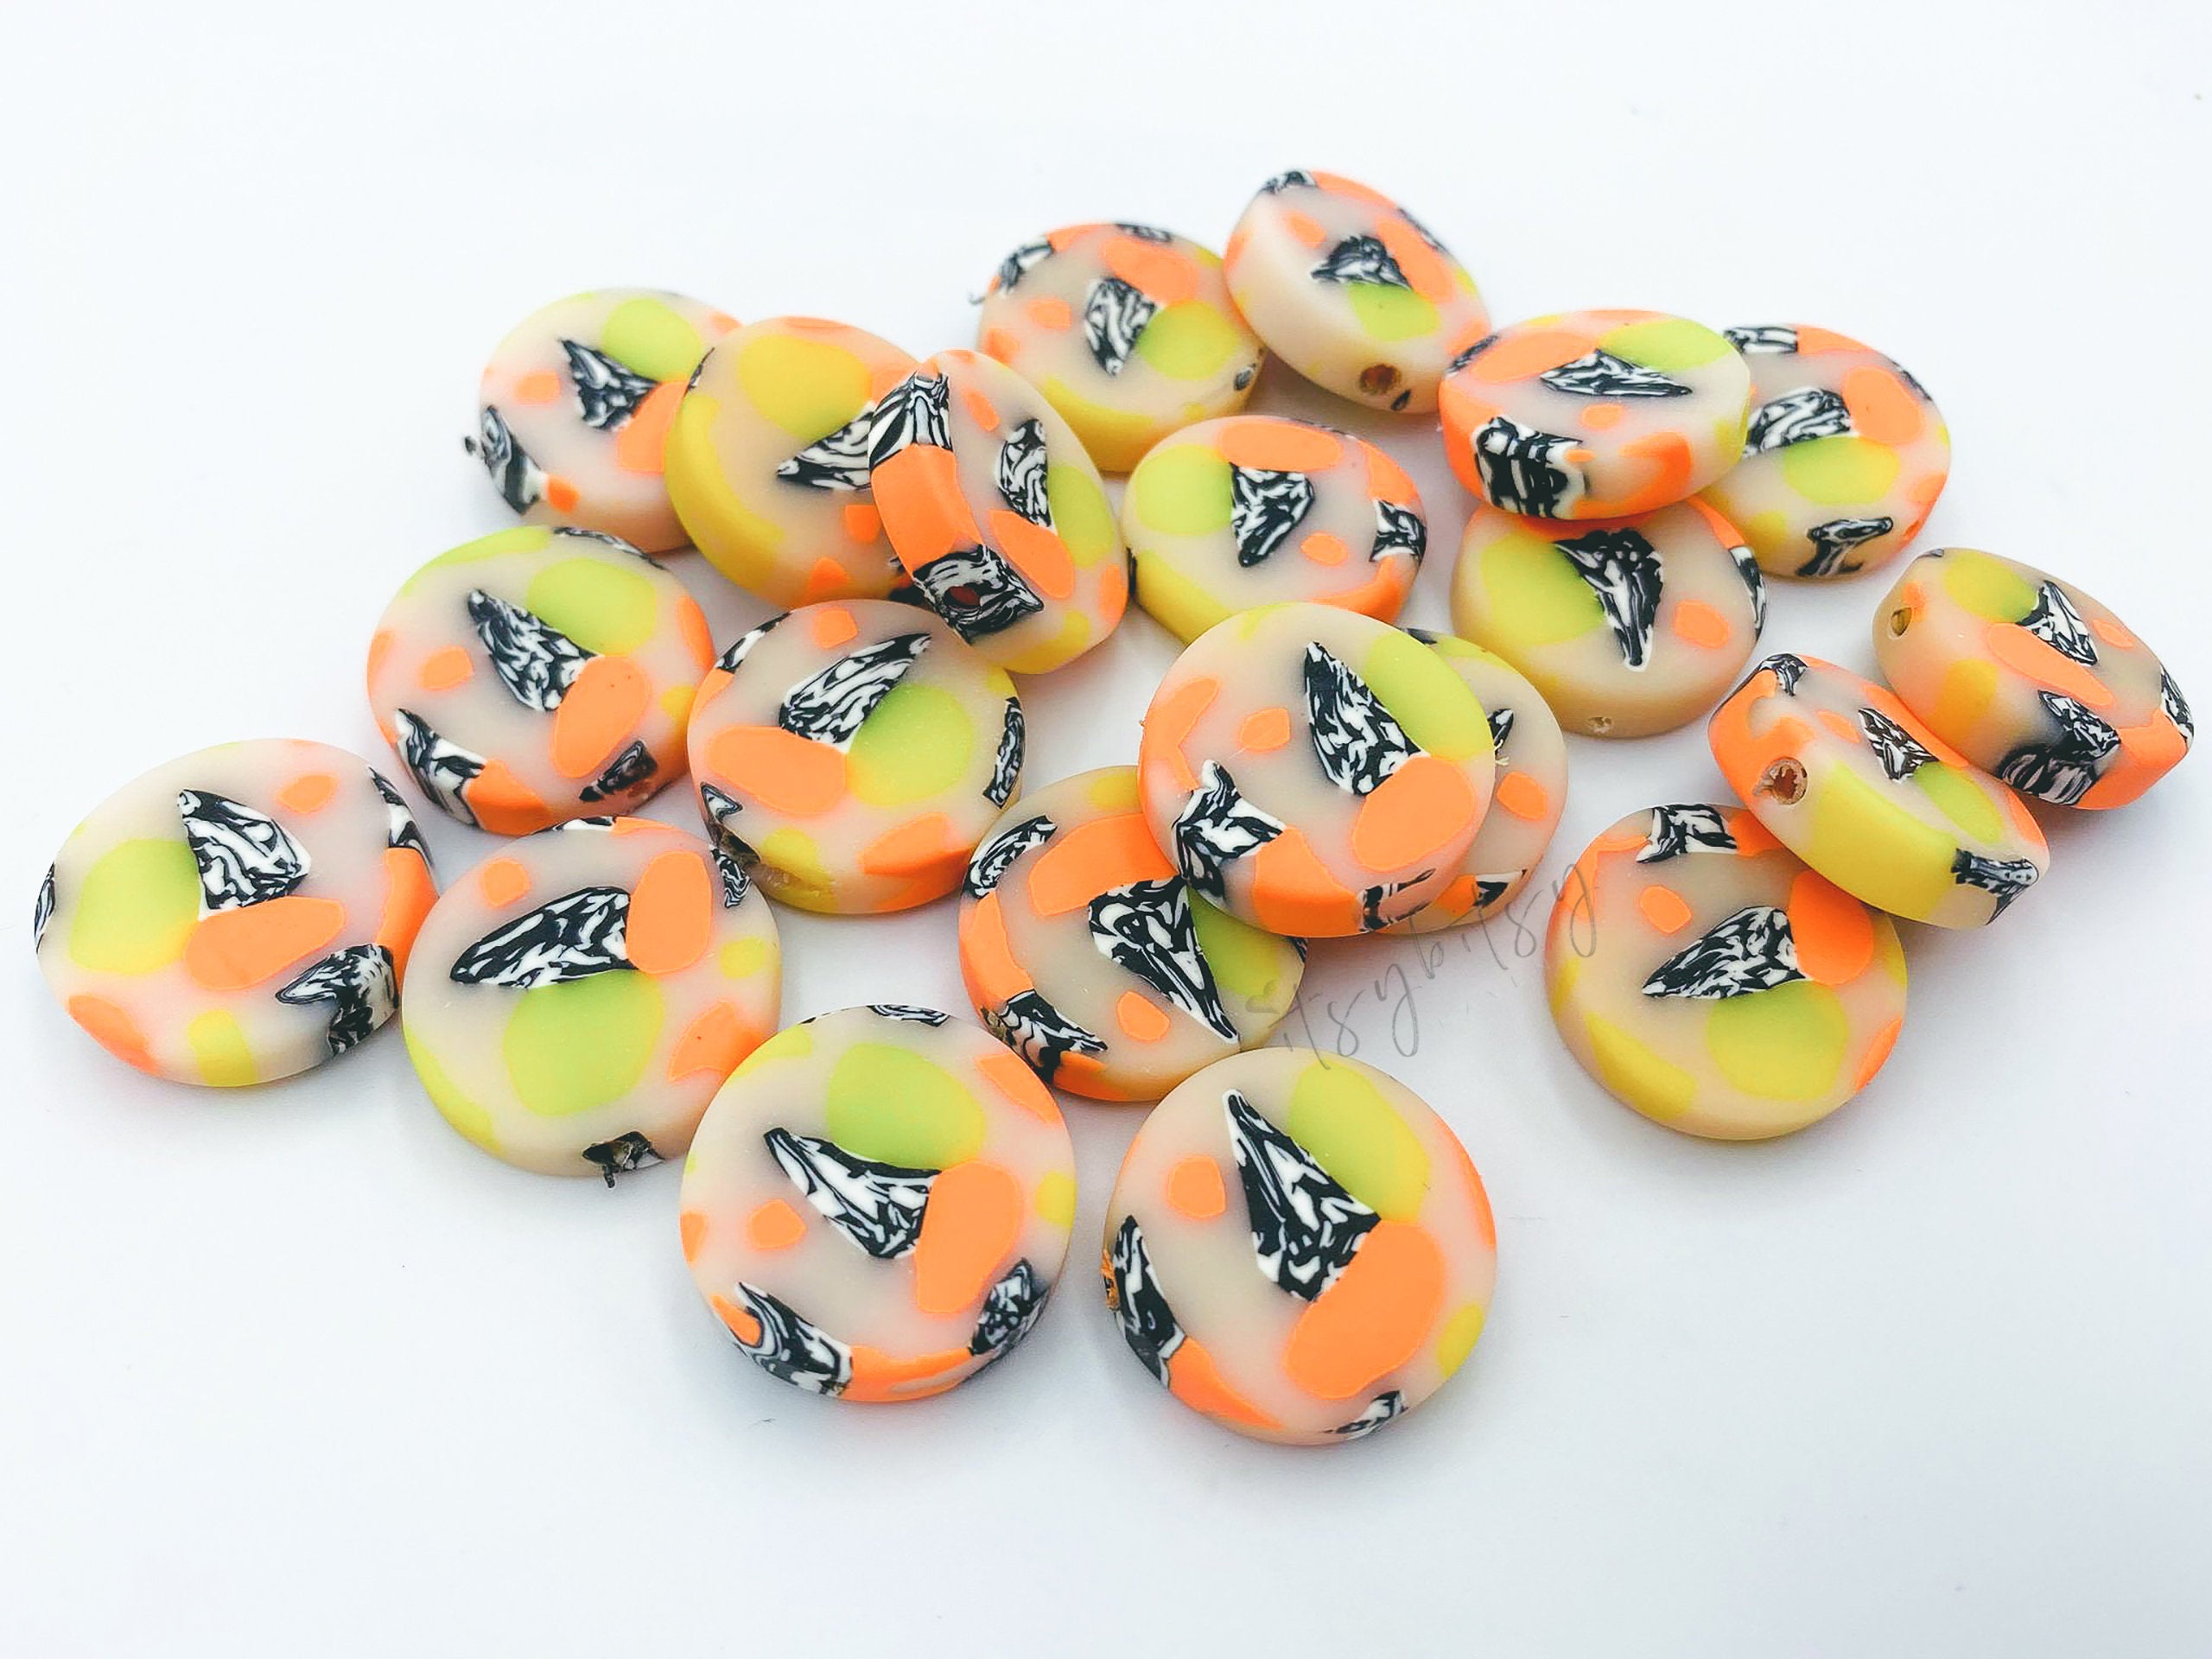 4pcs , Approx 18x5mm, Round (Flat) Handmade Polymer Clay Beads for Earring / Pendant in Misty Rose